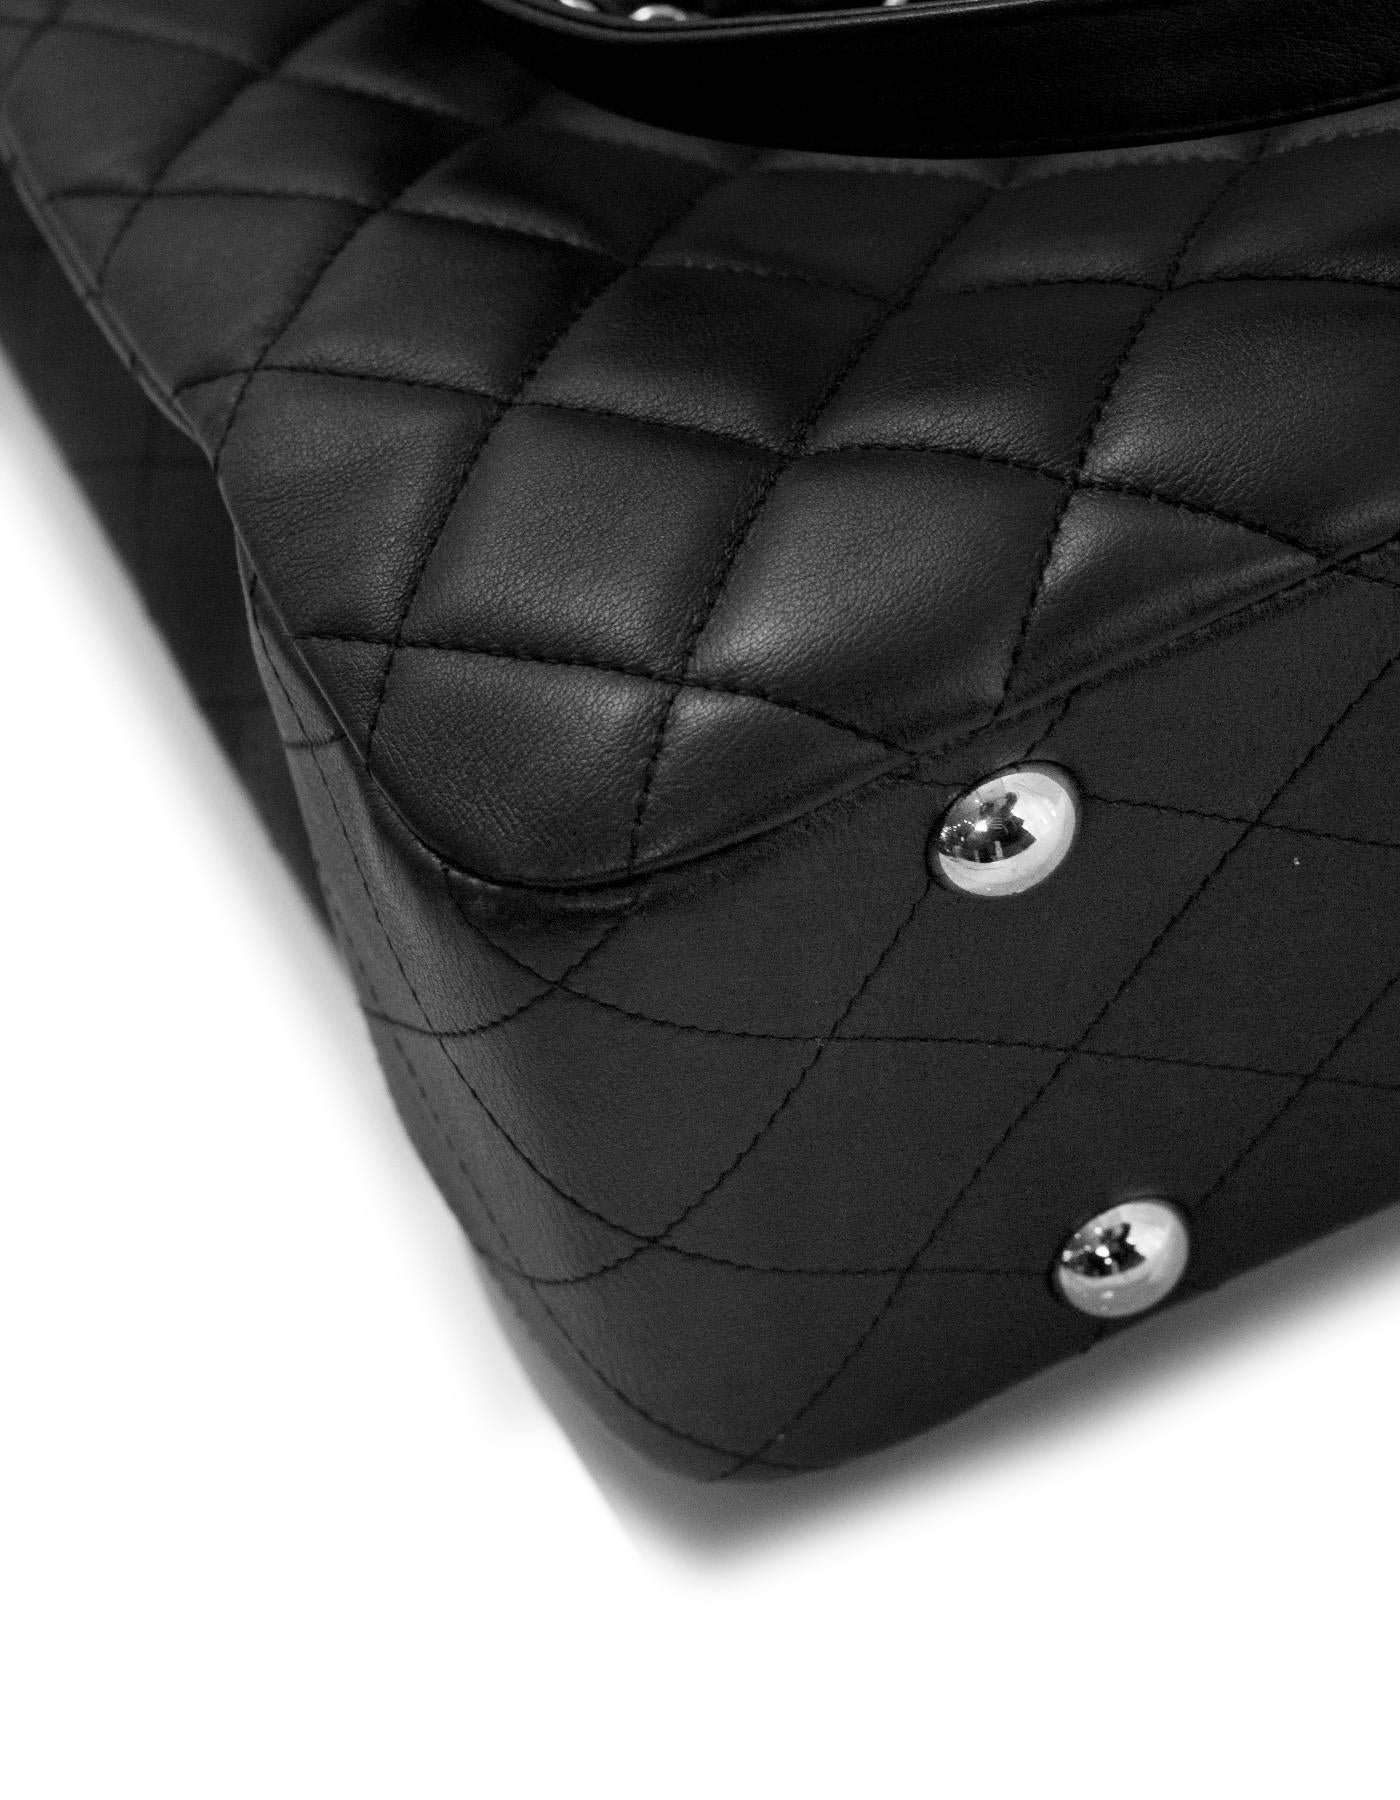 Women's Chanel Black Quilted Leather Flap Large Shopping Tote Bag rt. $5, 500